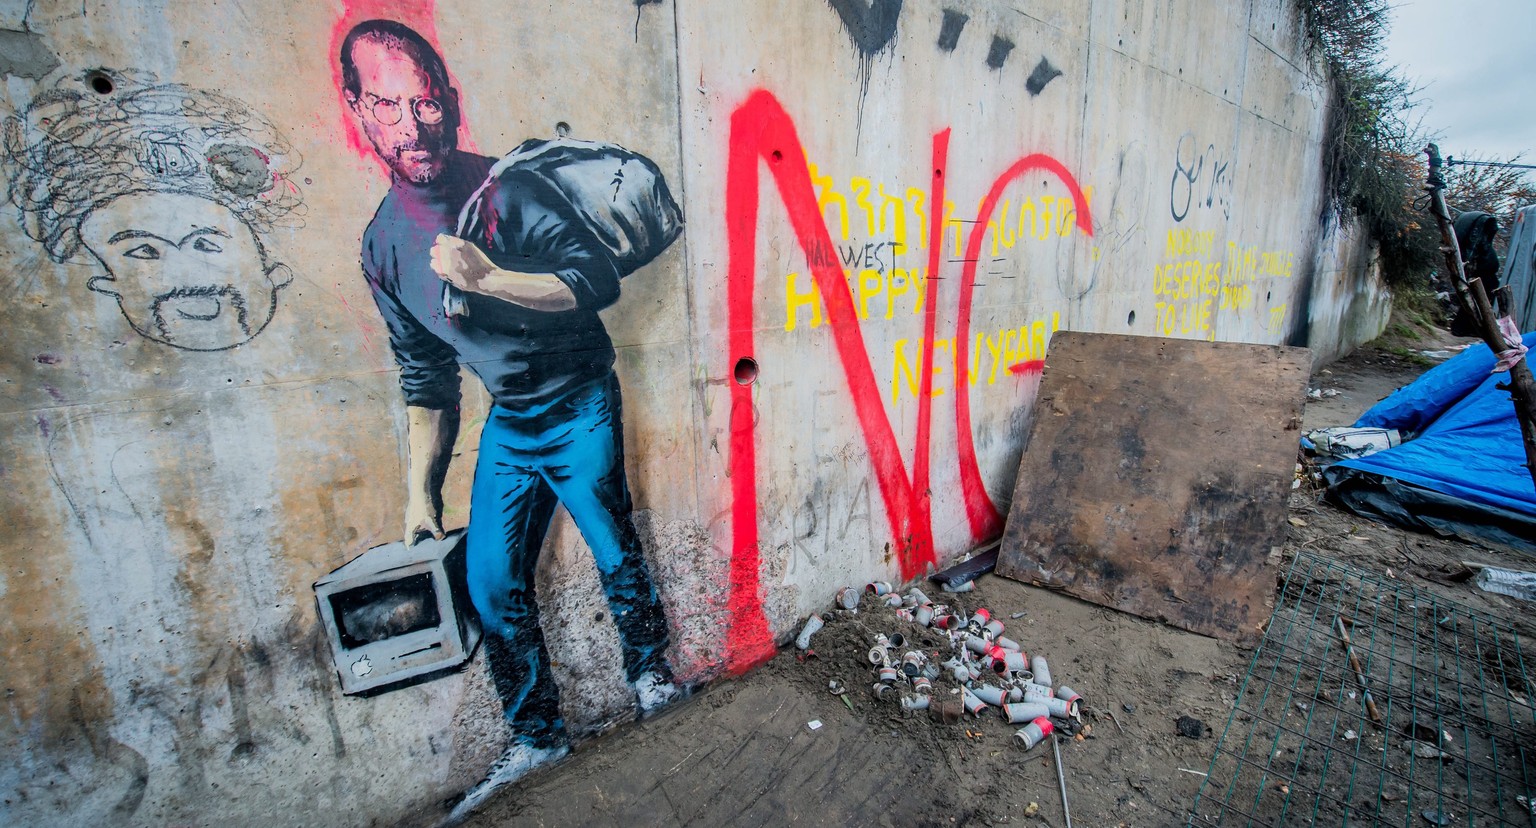 epa05080941 A tag of the artist Banksy representative Steve Jobs in the camp called &#039;The Jungle&#039; in the port of Calais, France, 25 December 2015. By this Banksy tag means that Steve Jobs was ...